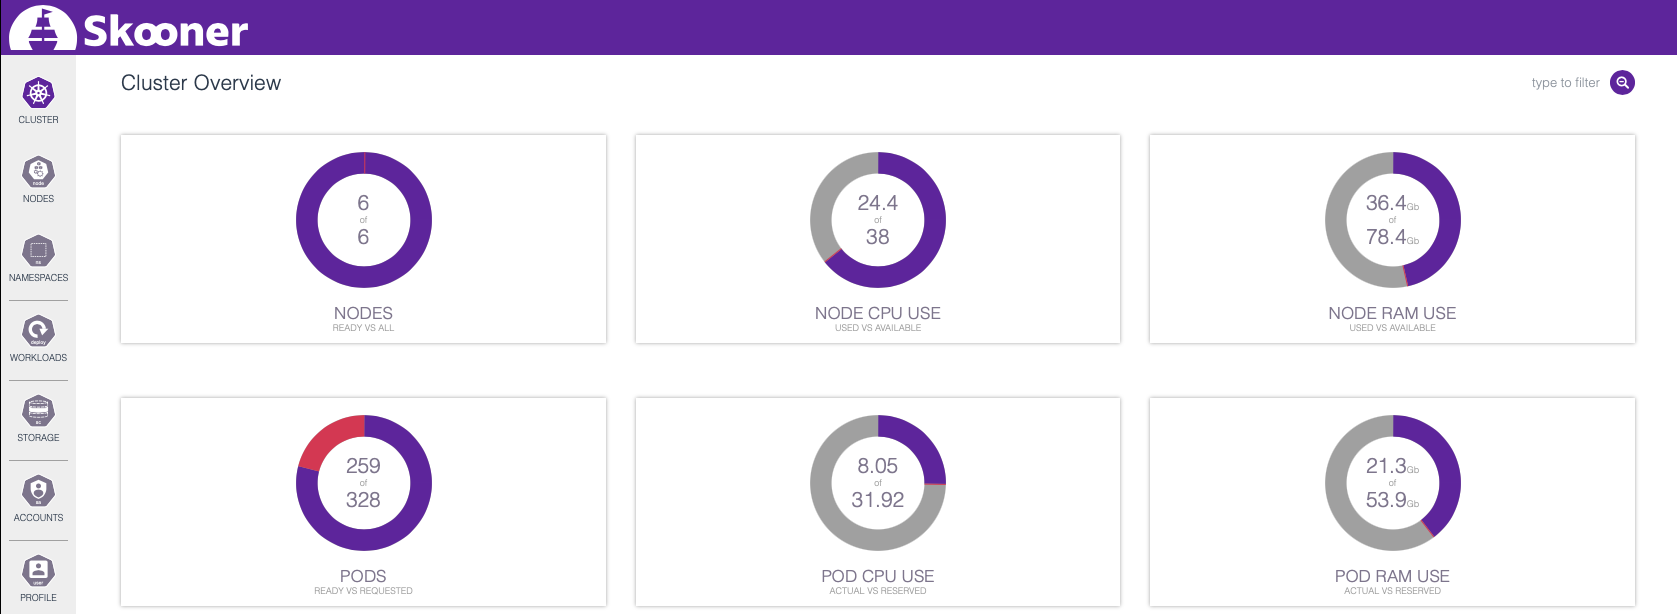 The cluster overview page shows how cluster resource usage increases.